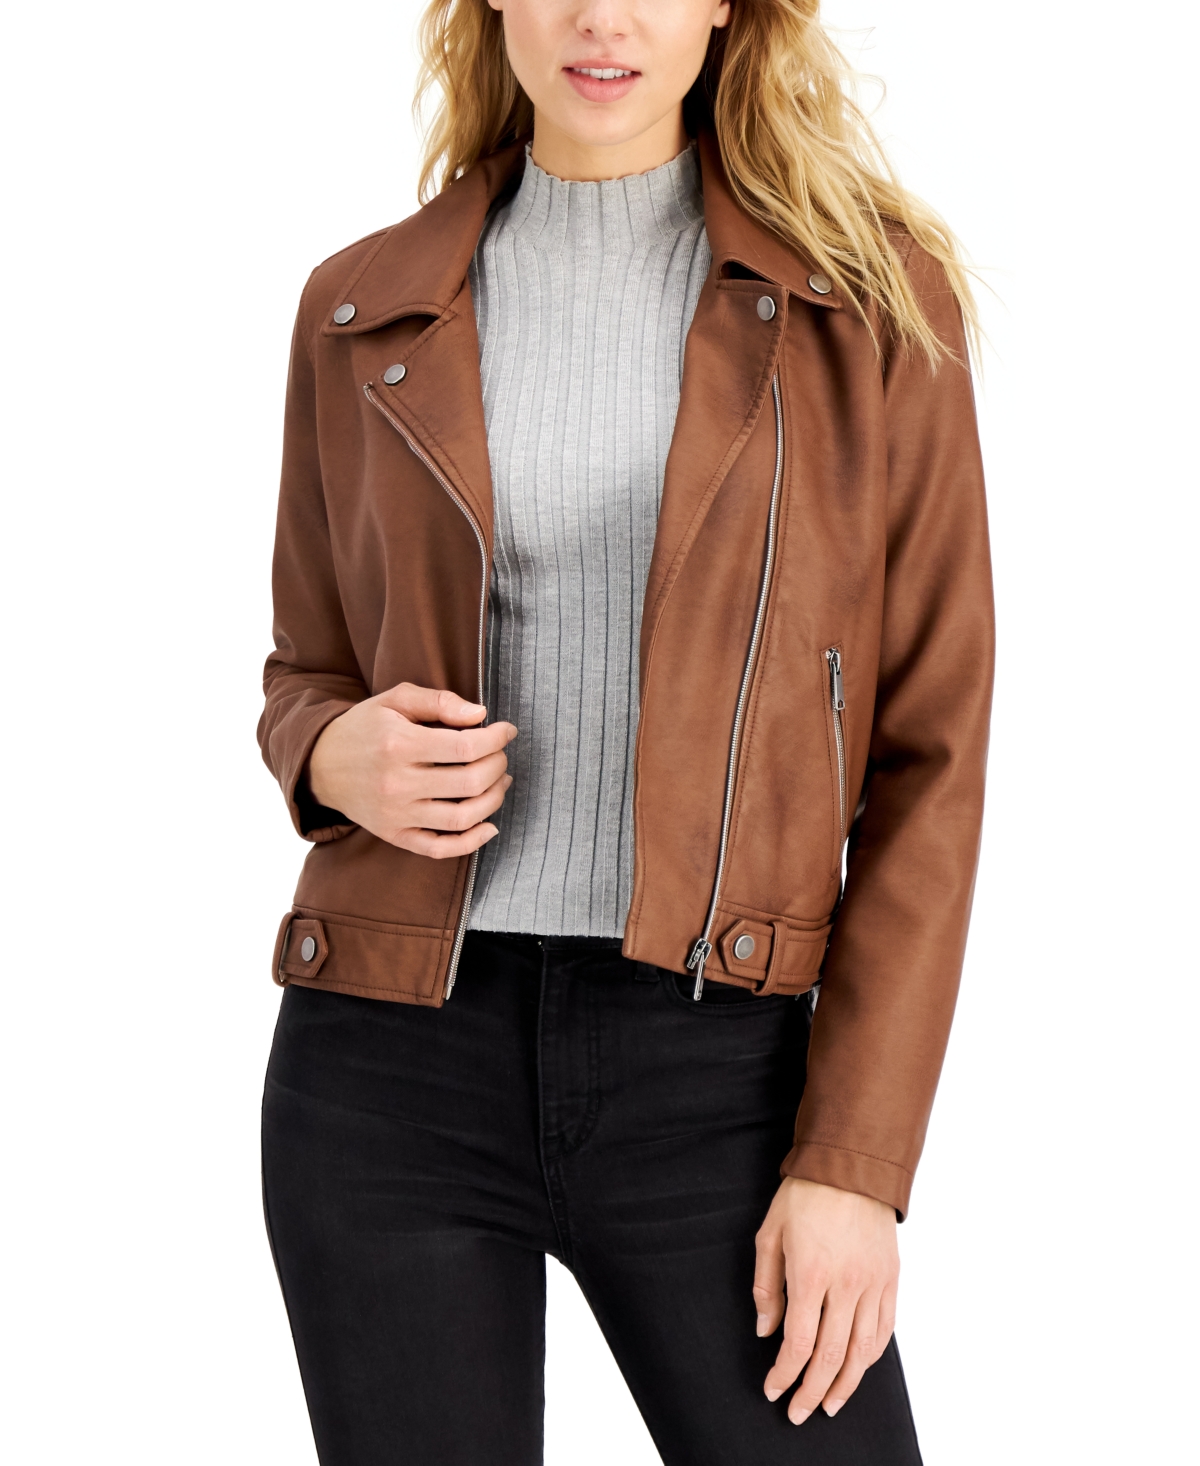 CoffeeShop Juniors' Faux-Leather Moto Jacket, Created for Macy's